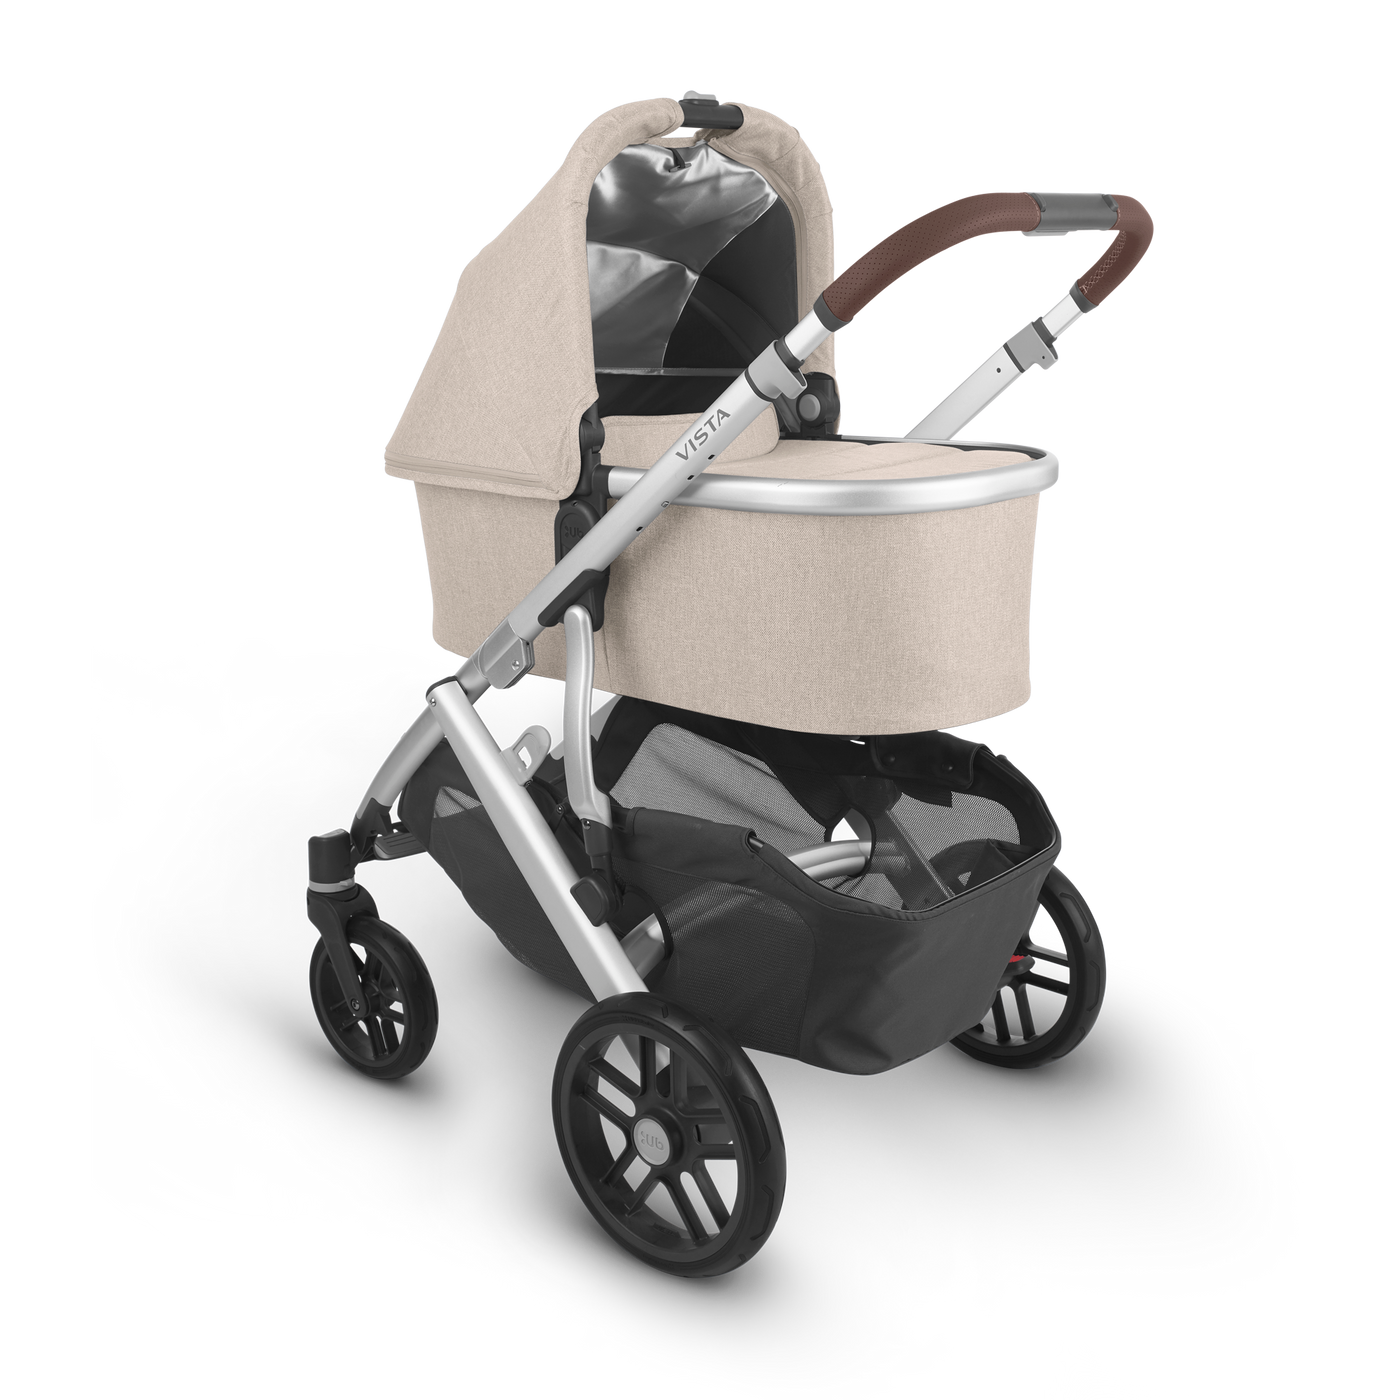 UPPAbaby Carrycot V2 - Declan